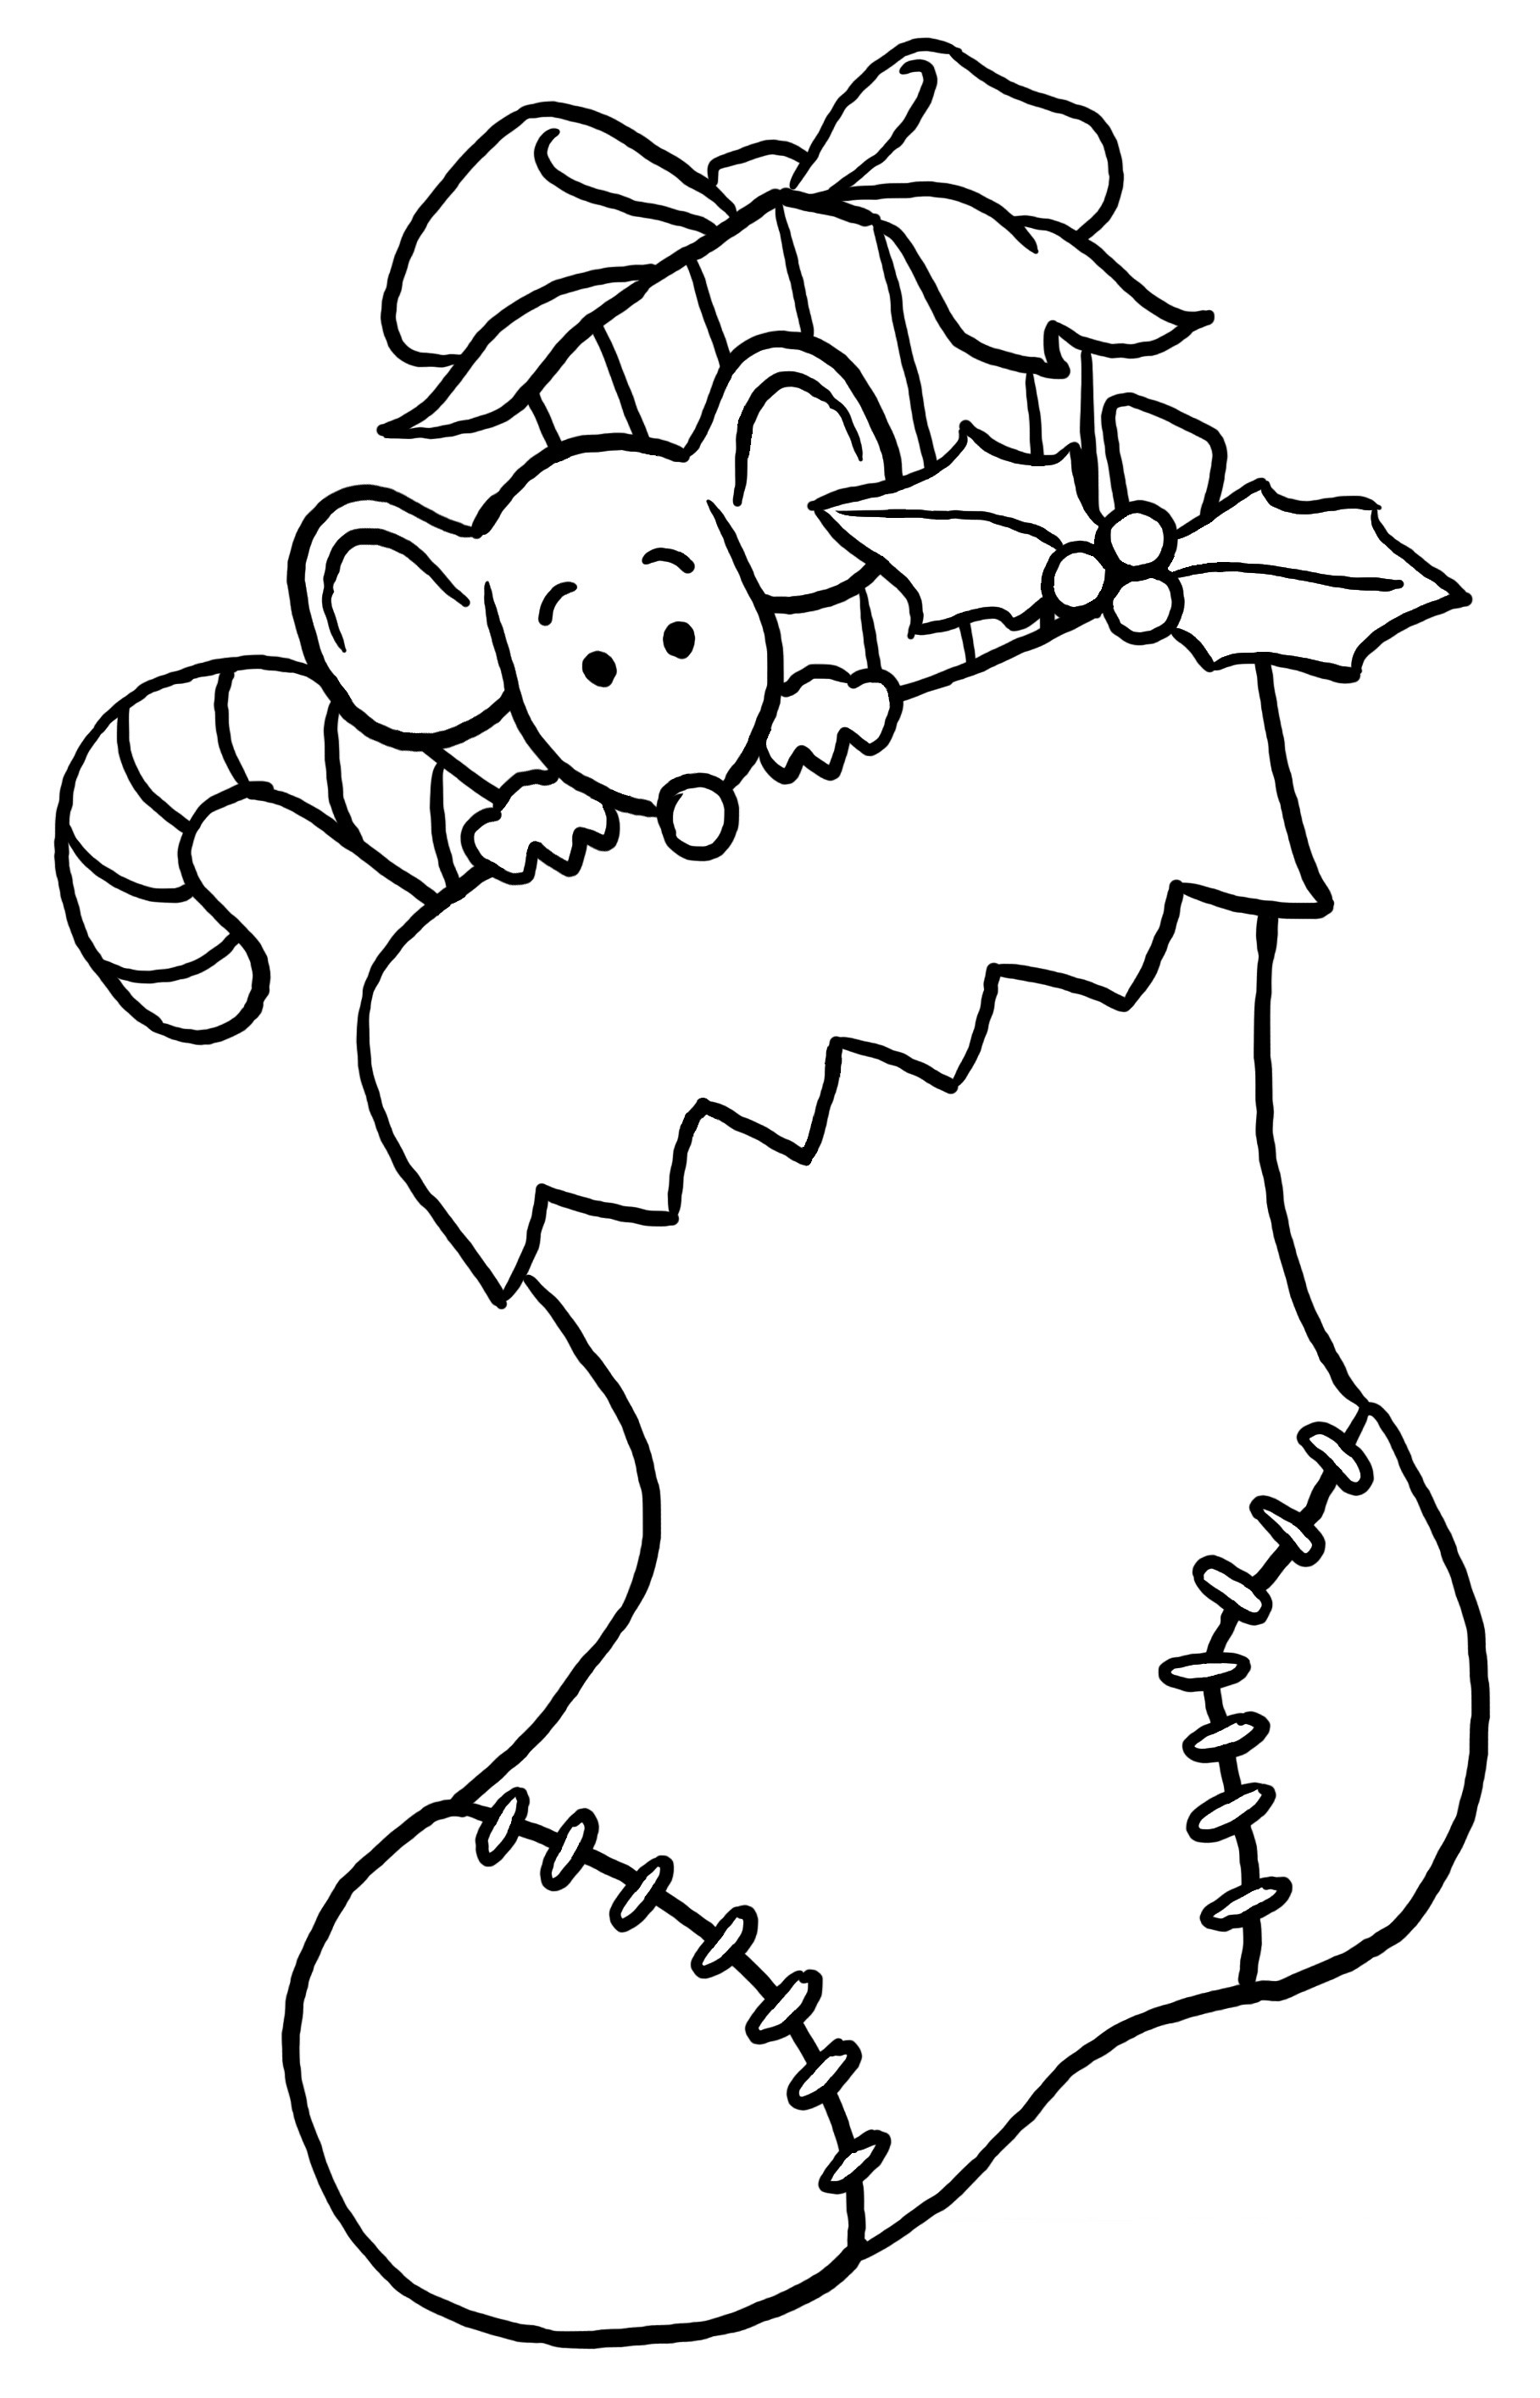 Christmas Activity Coloring Pages at GetColorings.com | Free printable